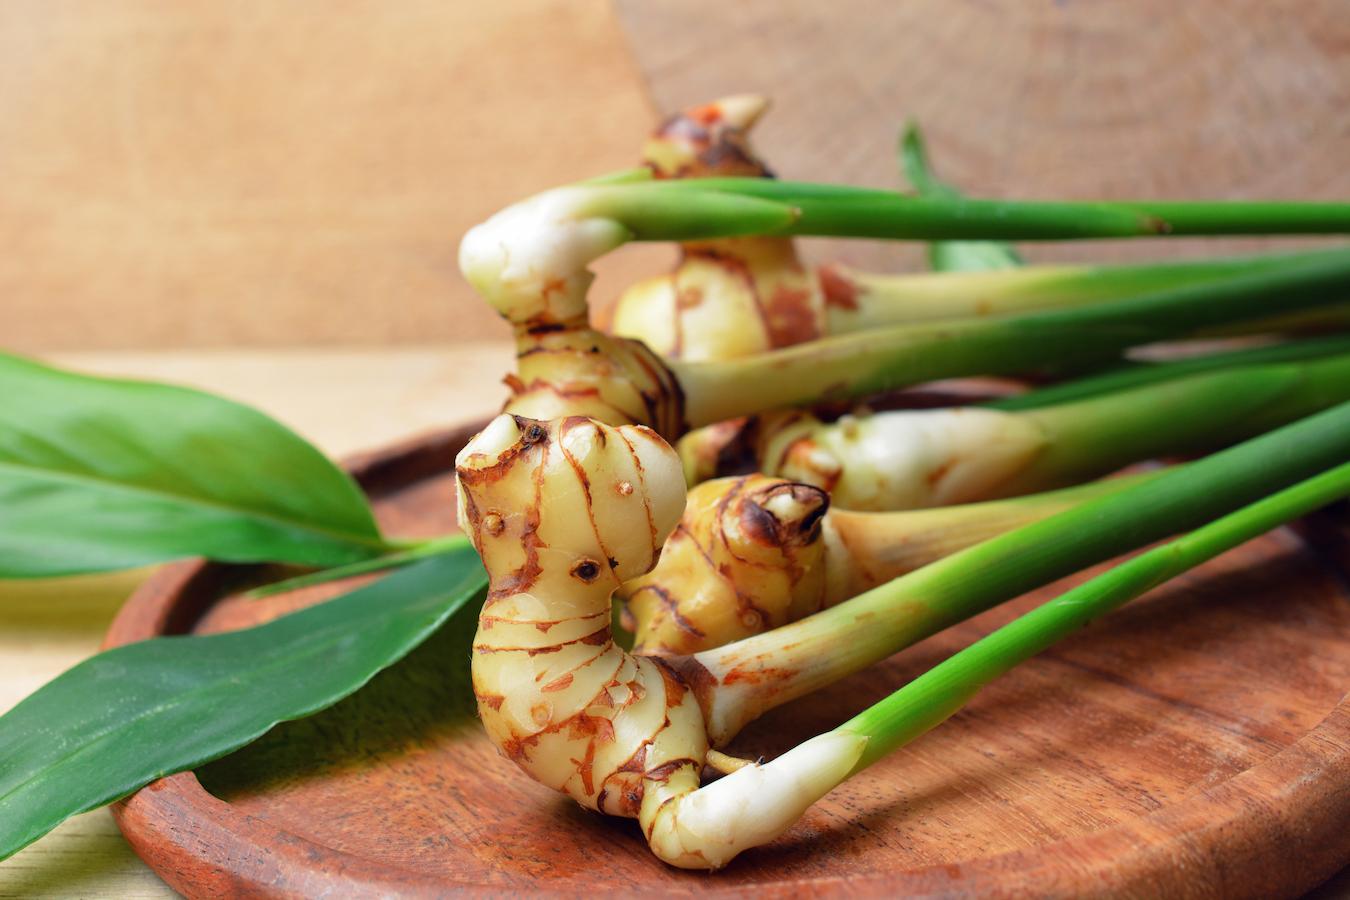 Galangal: The Jamu Ingredient You've Been Missing Out On JUARA Skincare